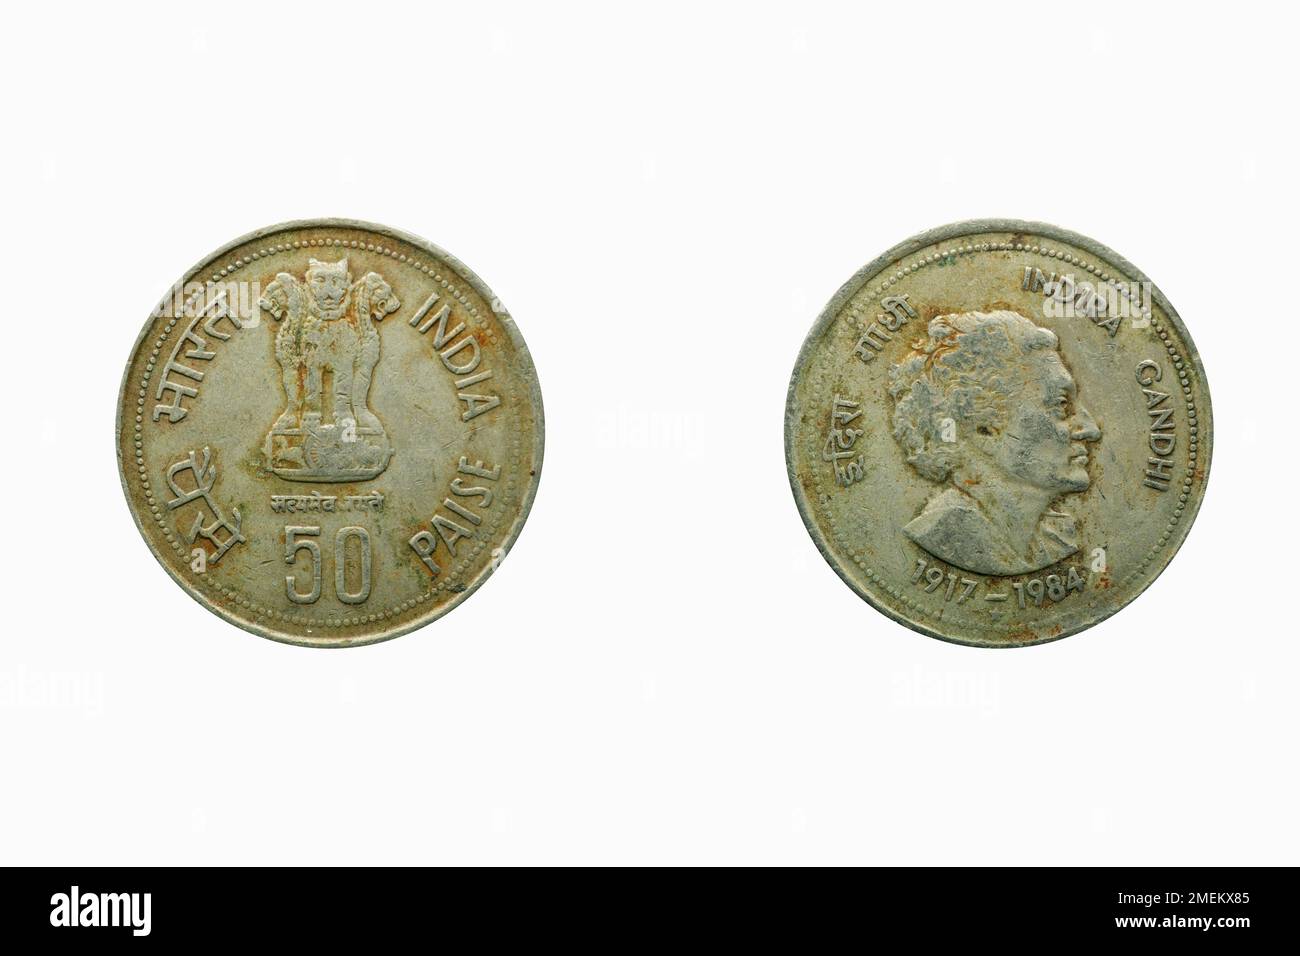 50 paise Indian coin currency, behind Indira Gandhi inprint, studio shot against white background Stock Photo